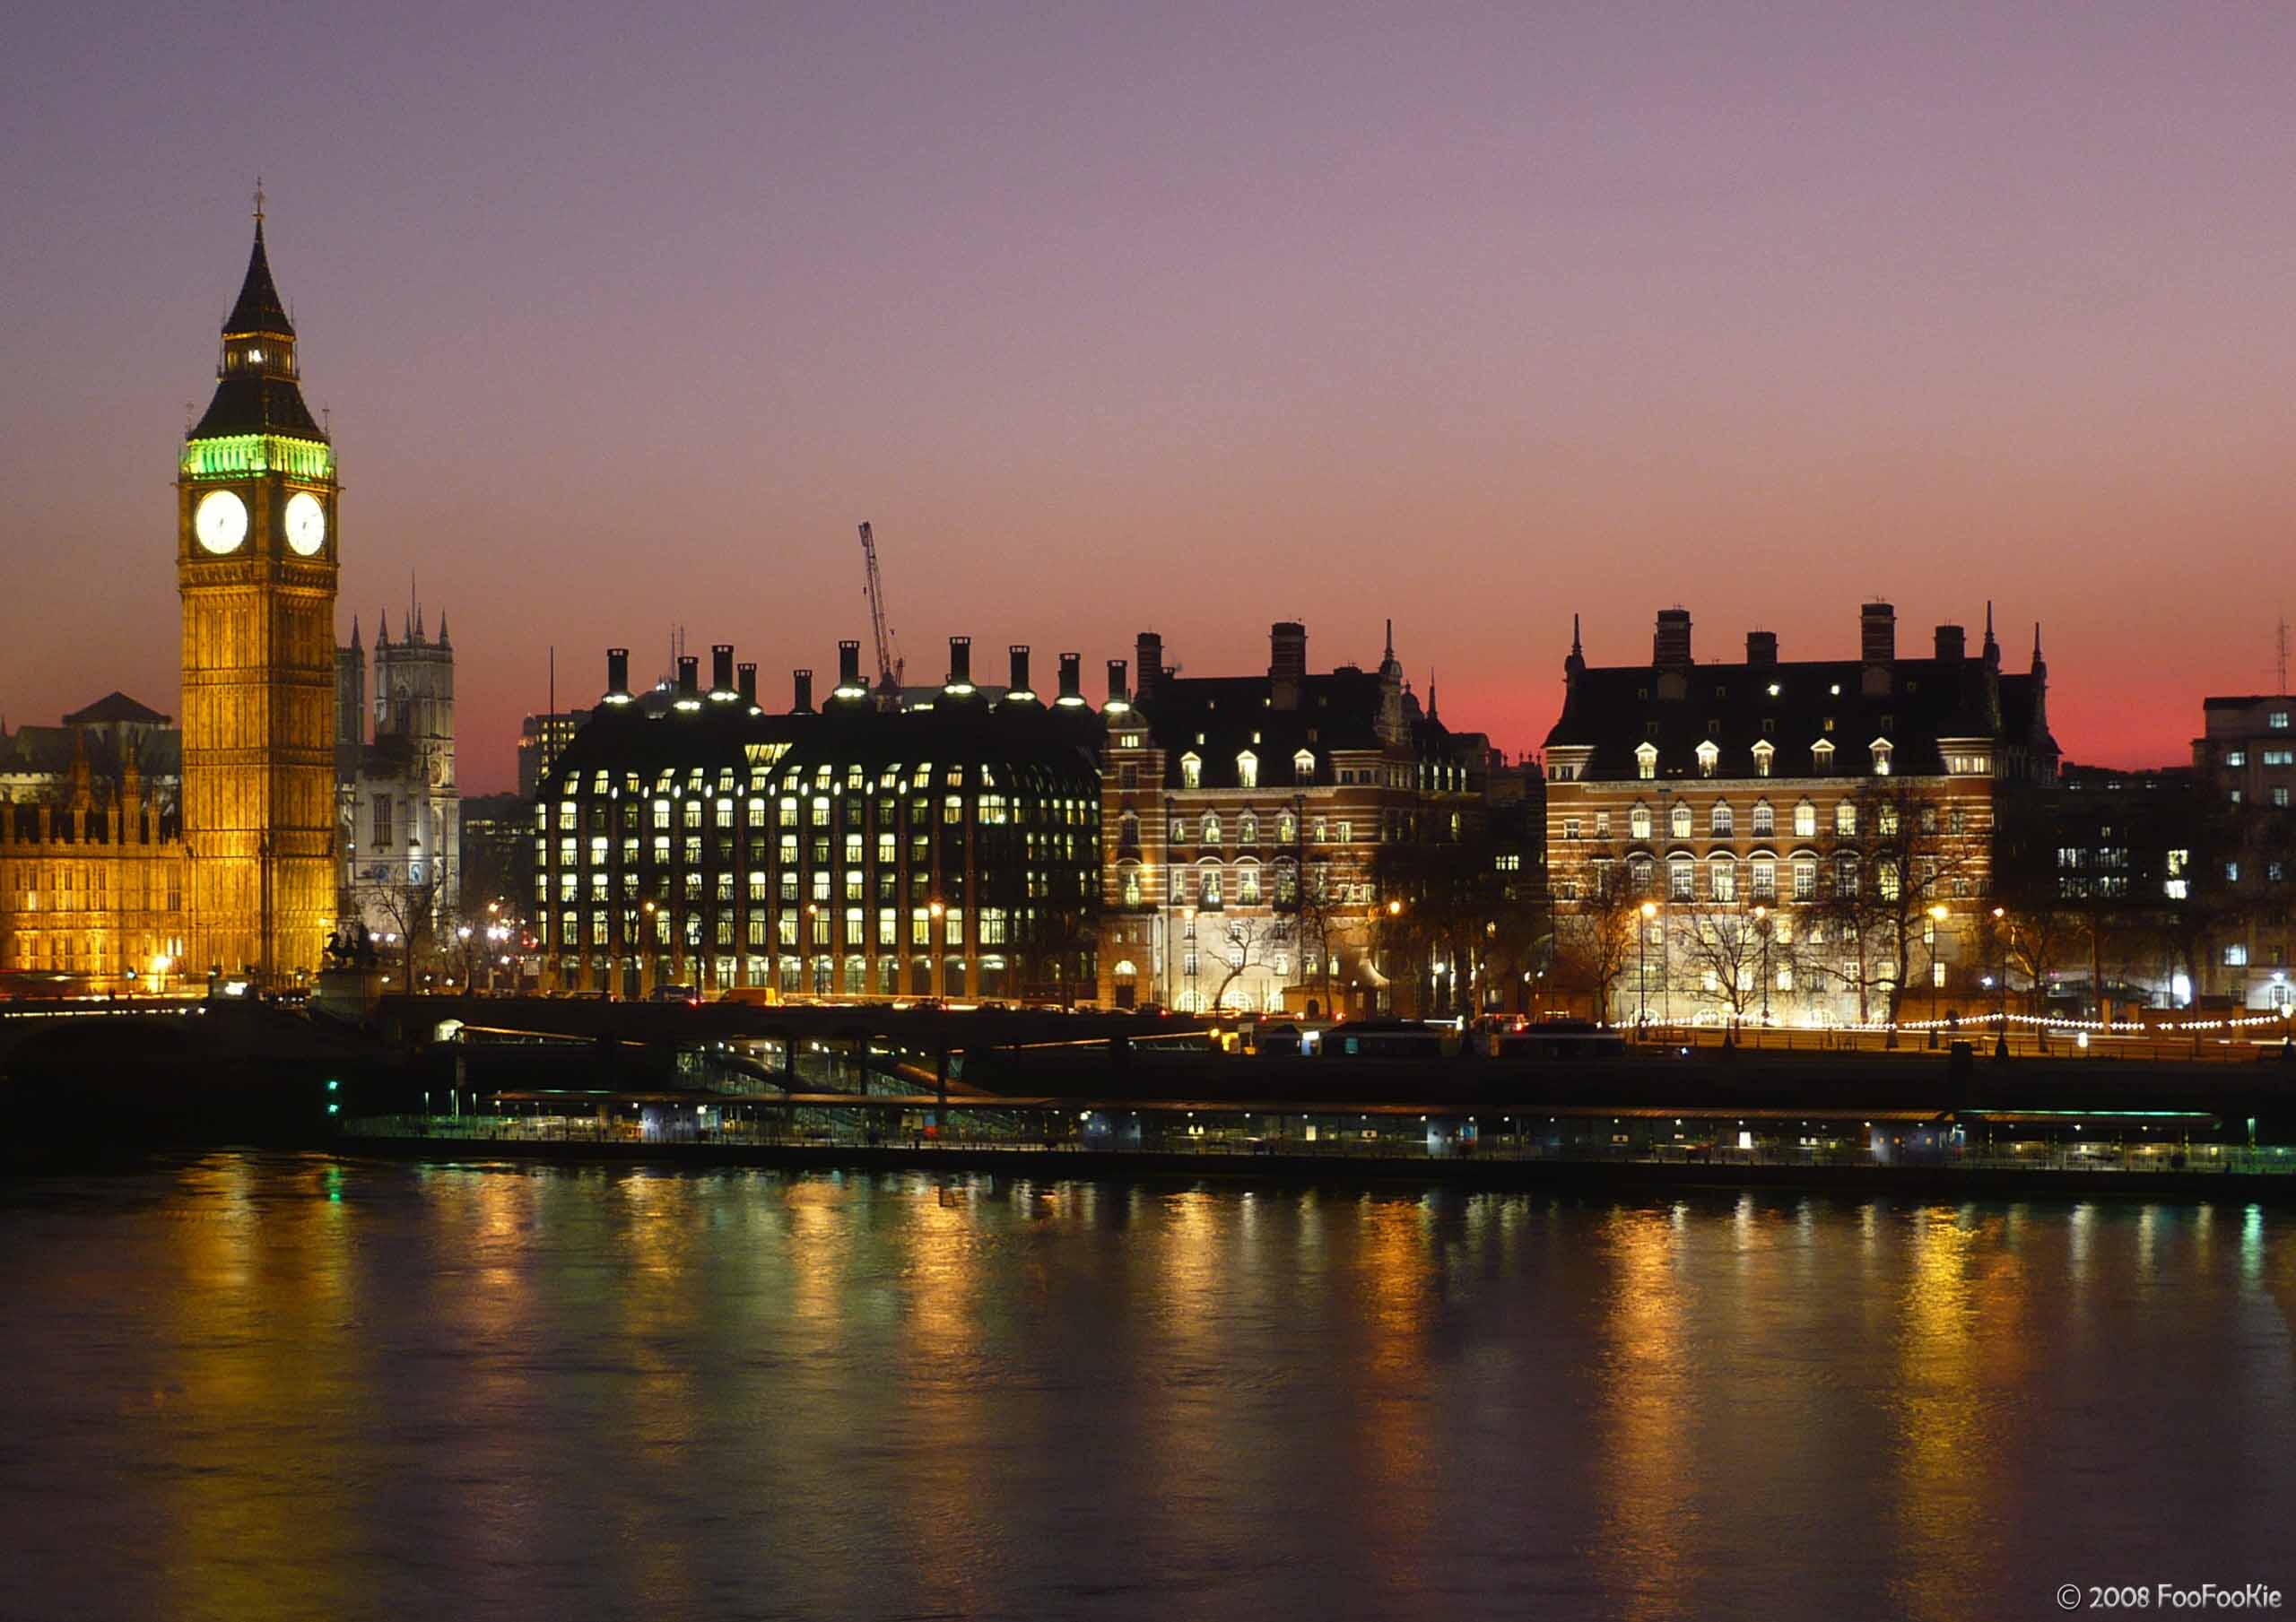 22 Delightfully Geeky Facts About The River Thames